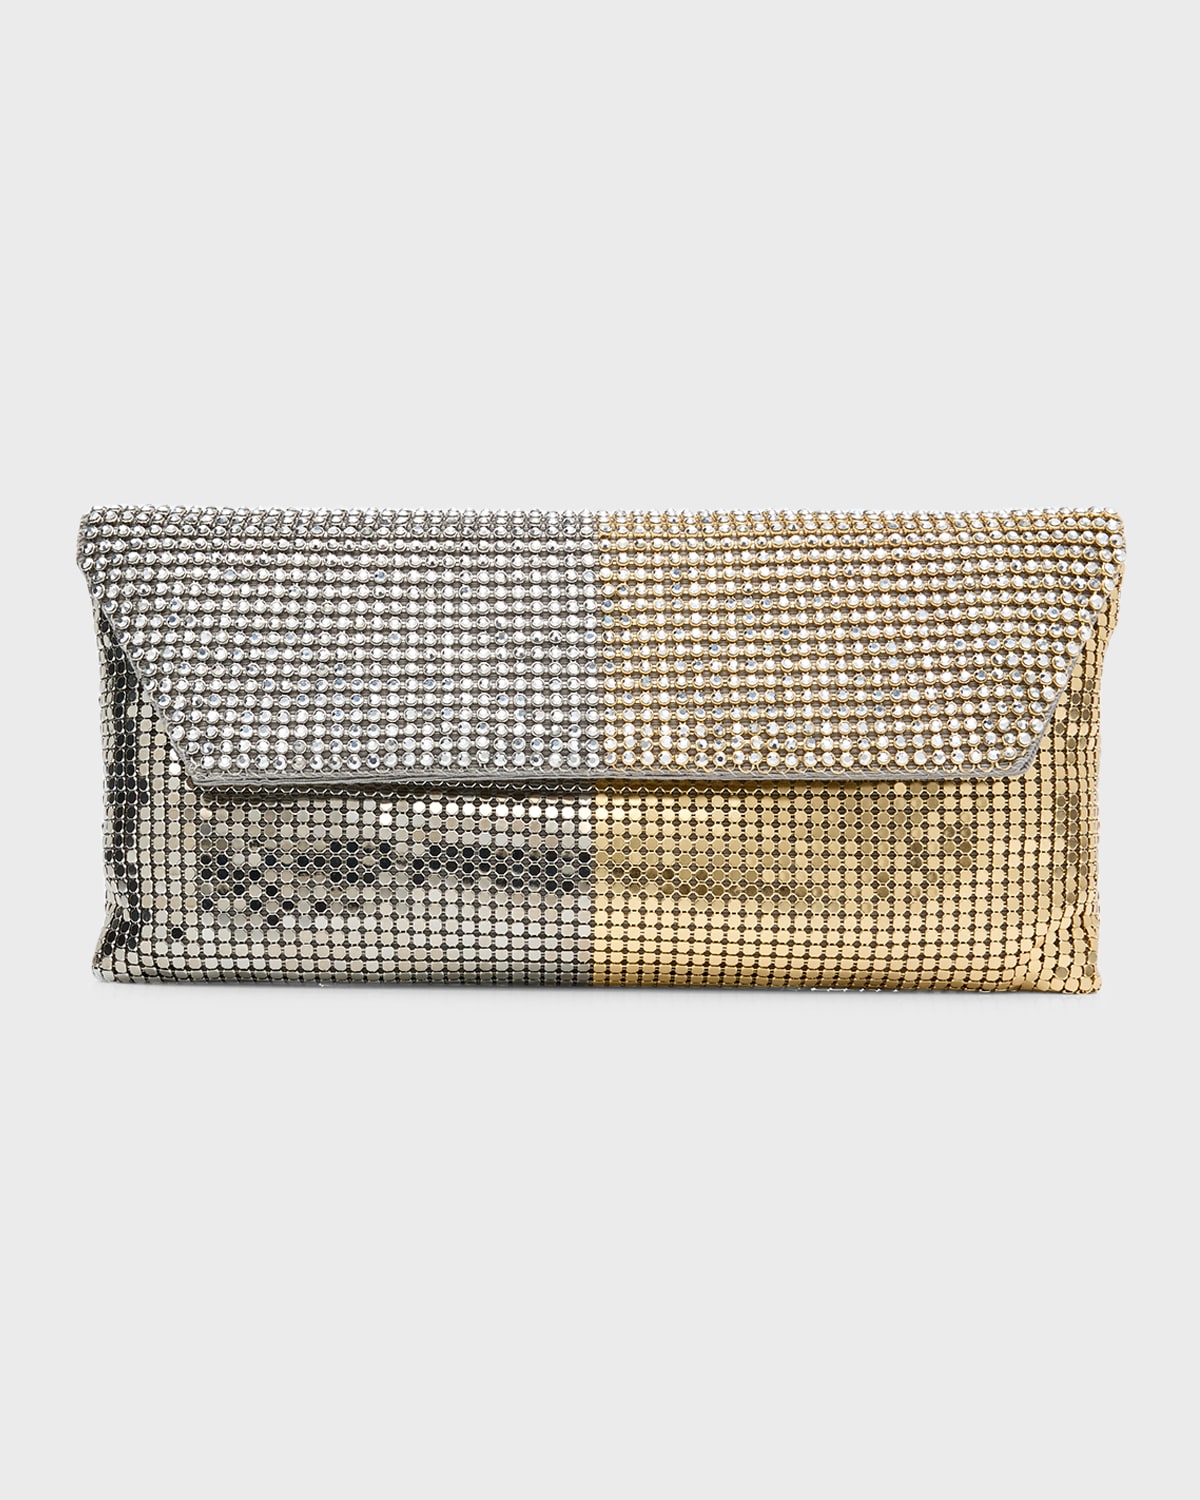 WHITING & DAVIS DUET TWO-TONE CRYSTAL CLUTCH BAG